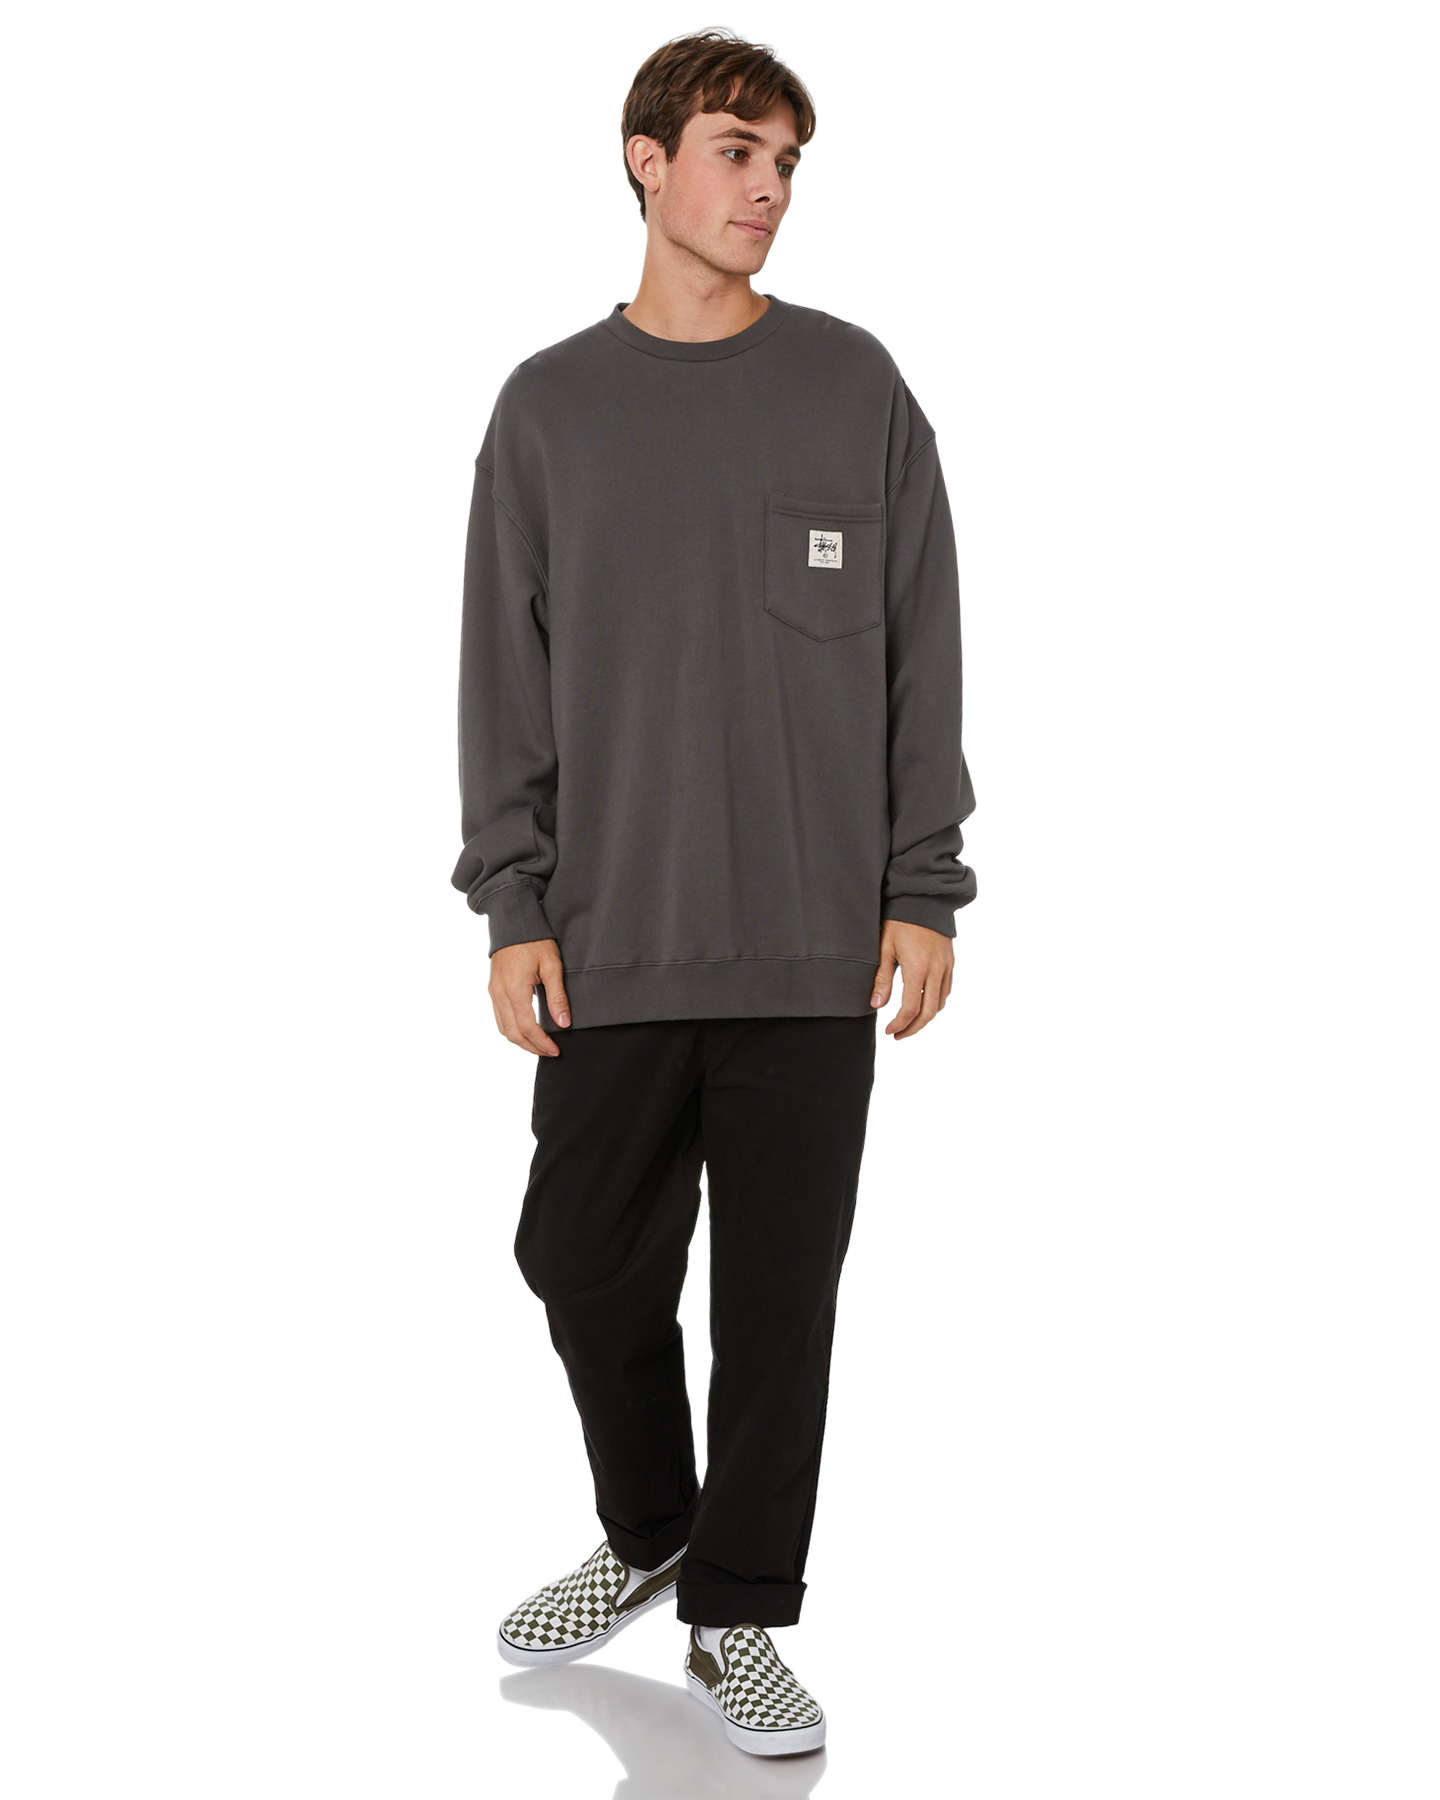 Stussy Stussy Pocket Mens Crew - Solid Charcoal | SurfStitch